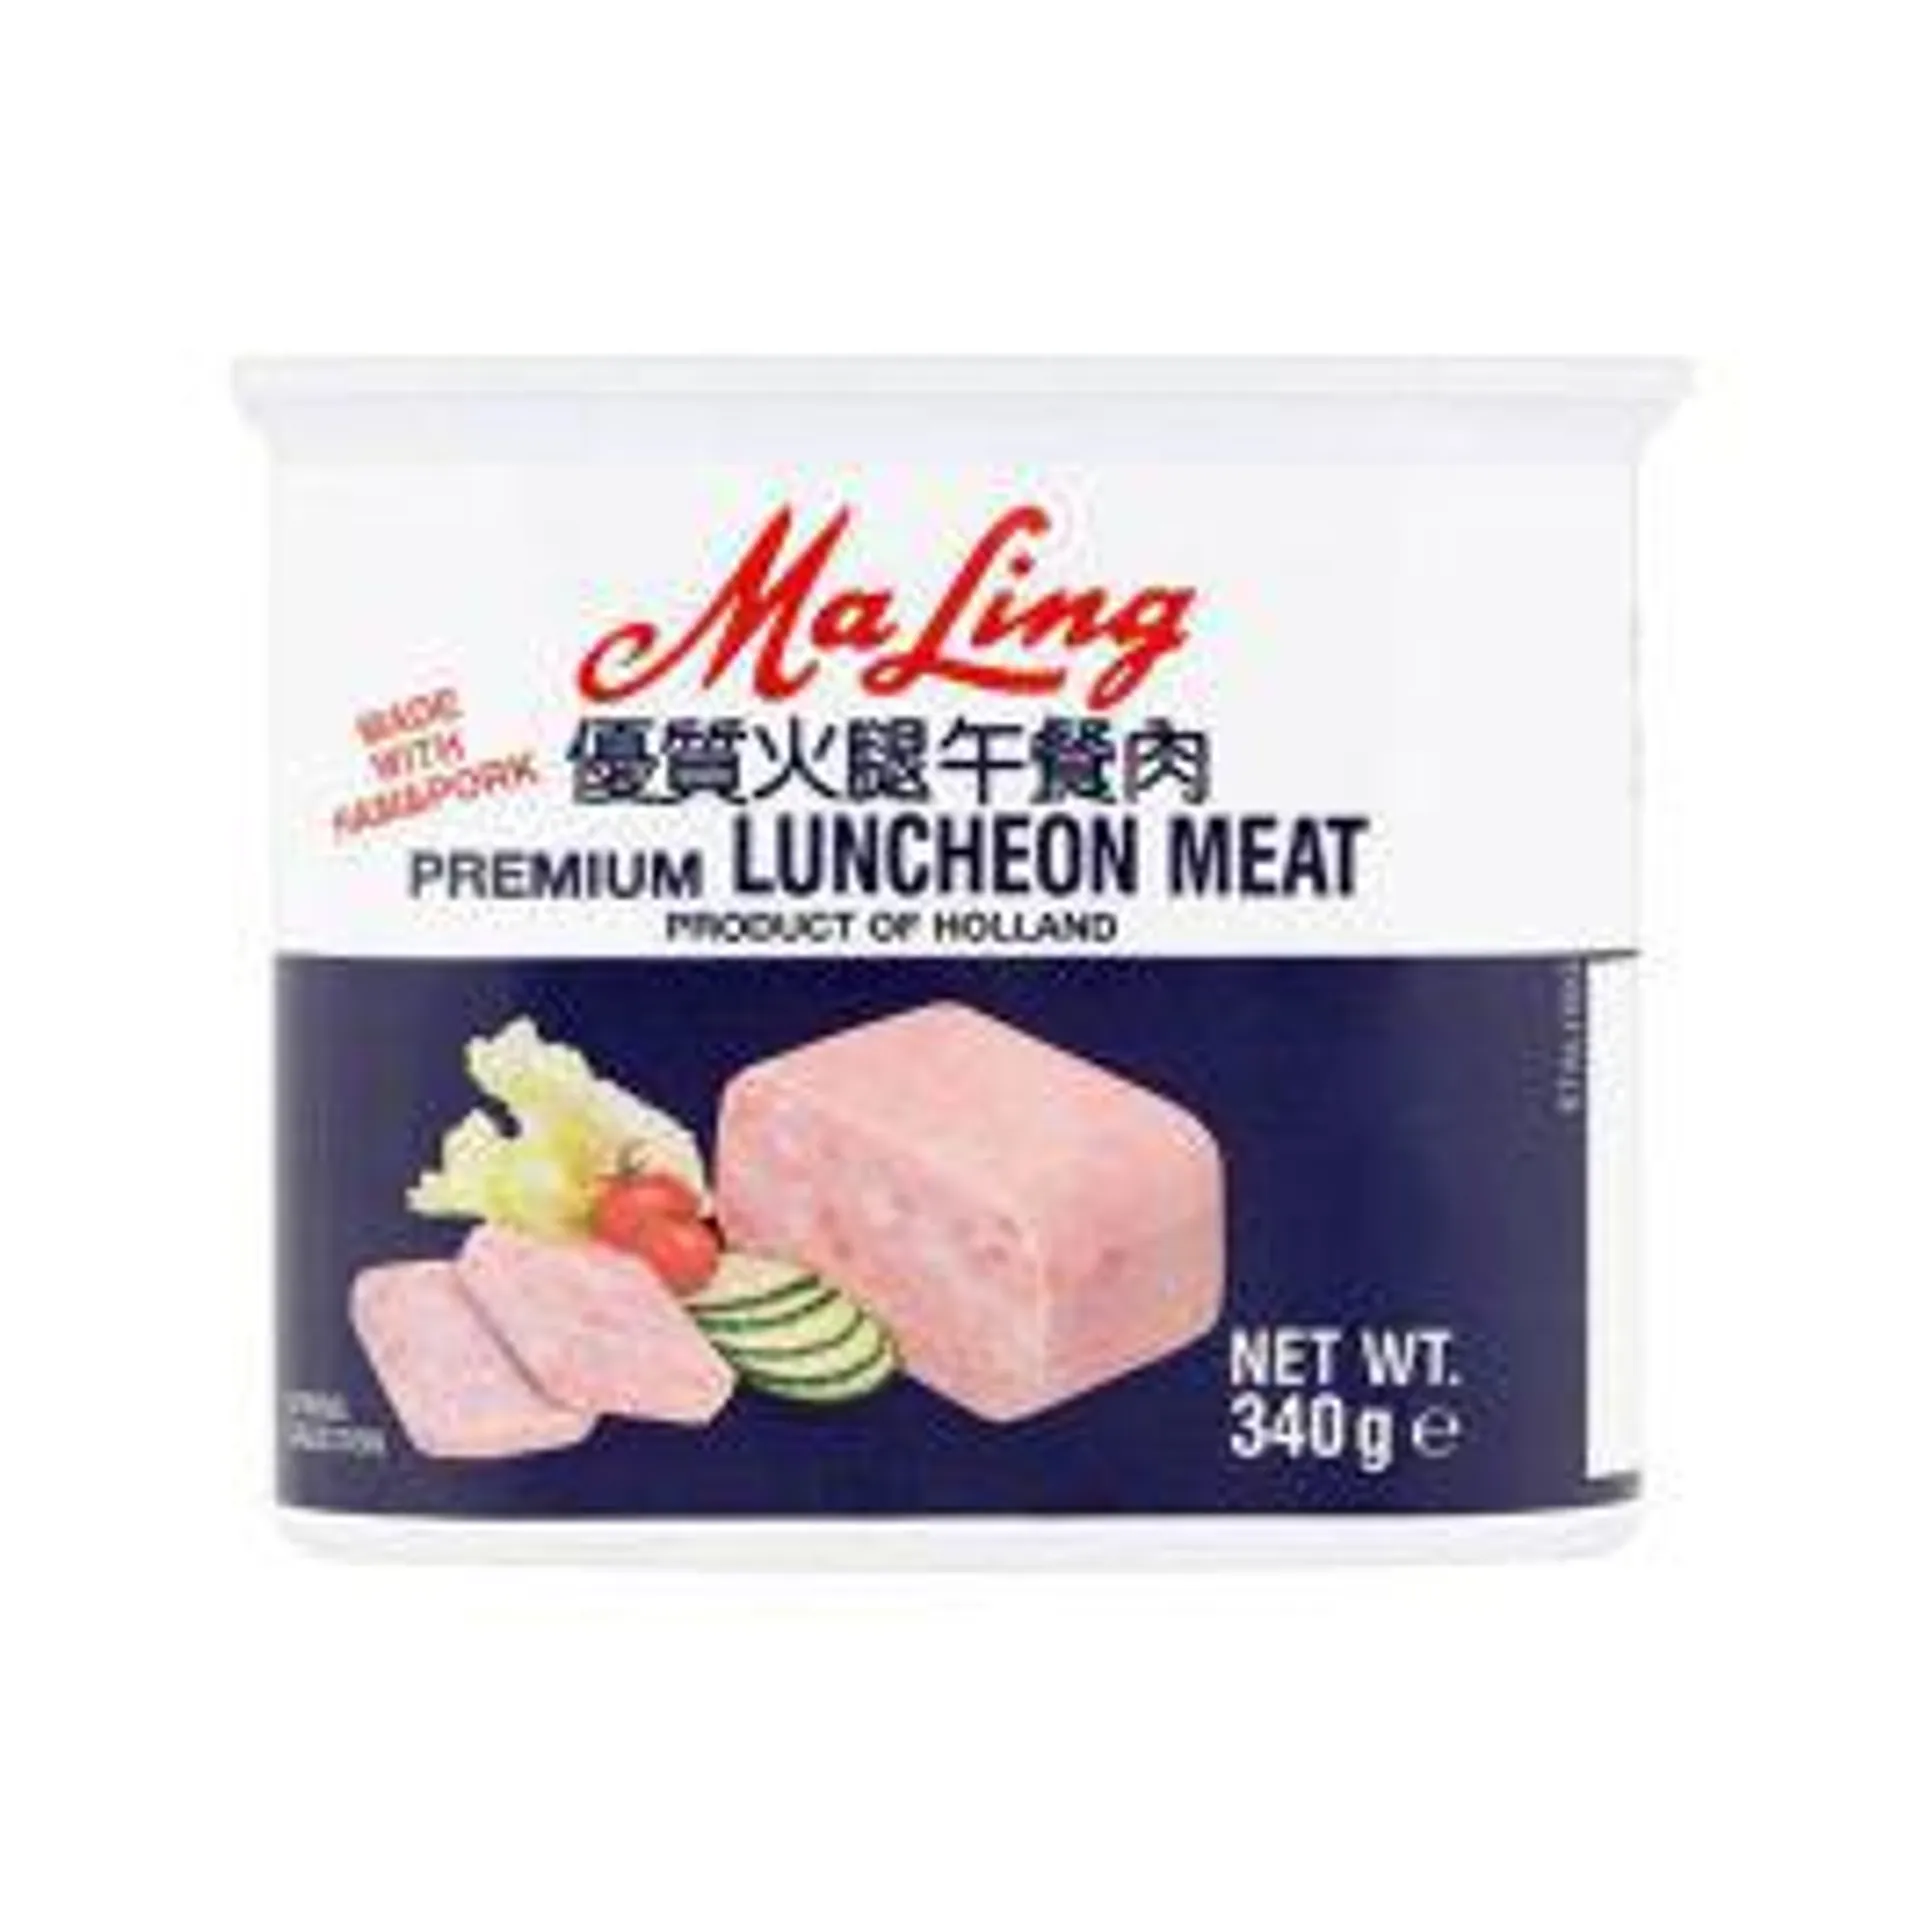 MALING - Luncheon Meat 340g